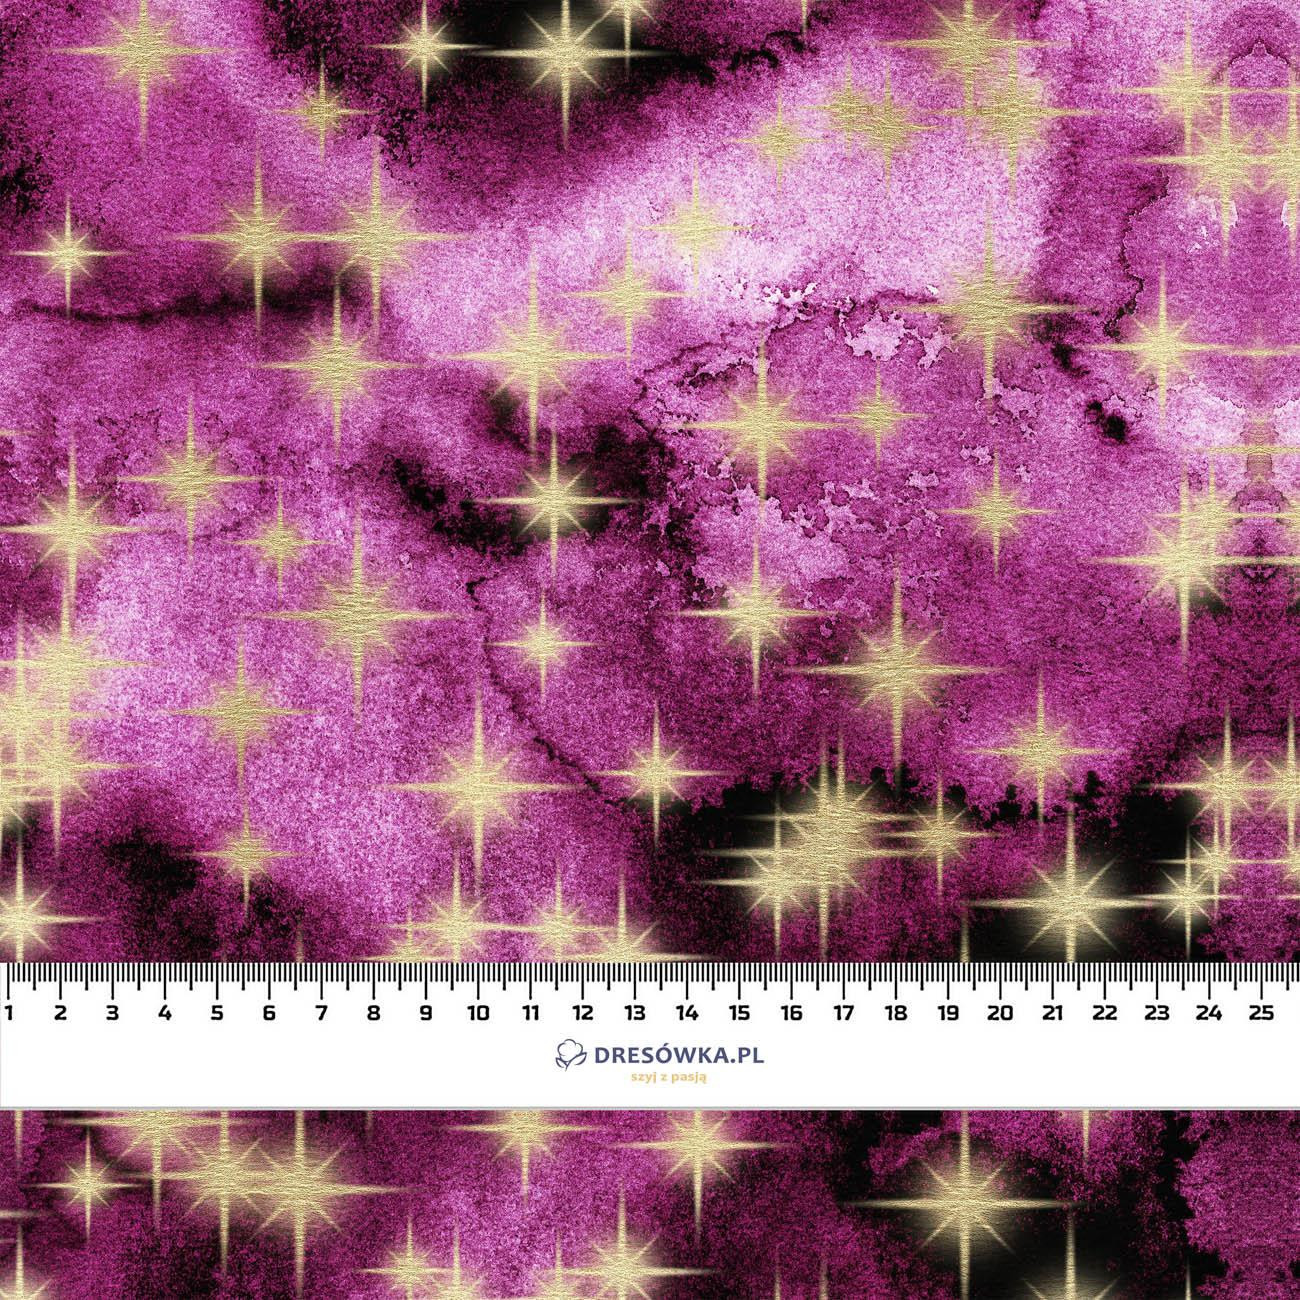 GOLDEN STARS Pat. 3 / WATERCOLOR MARBLE - Cotton woven fabric